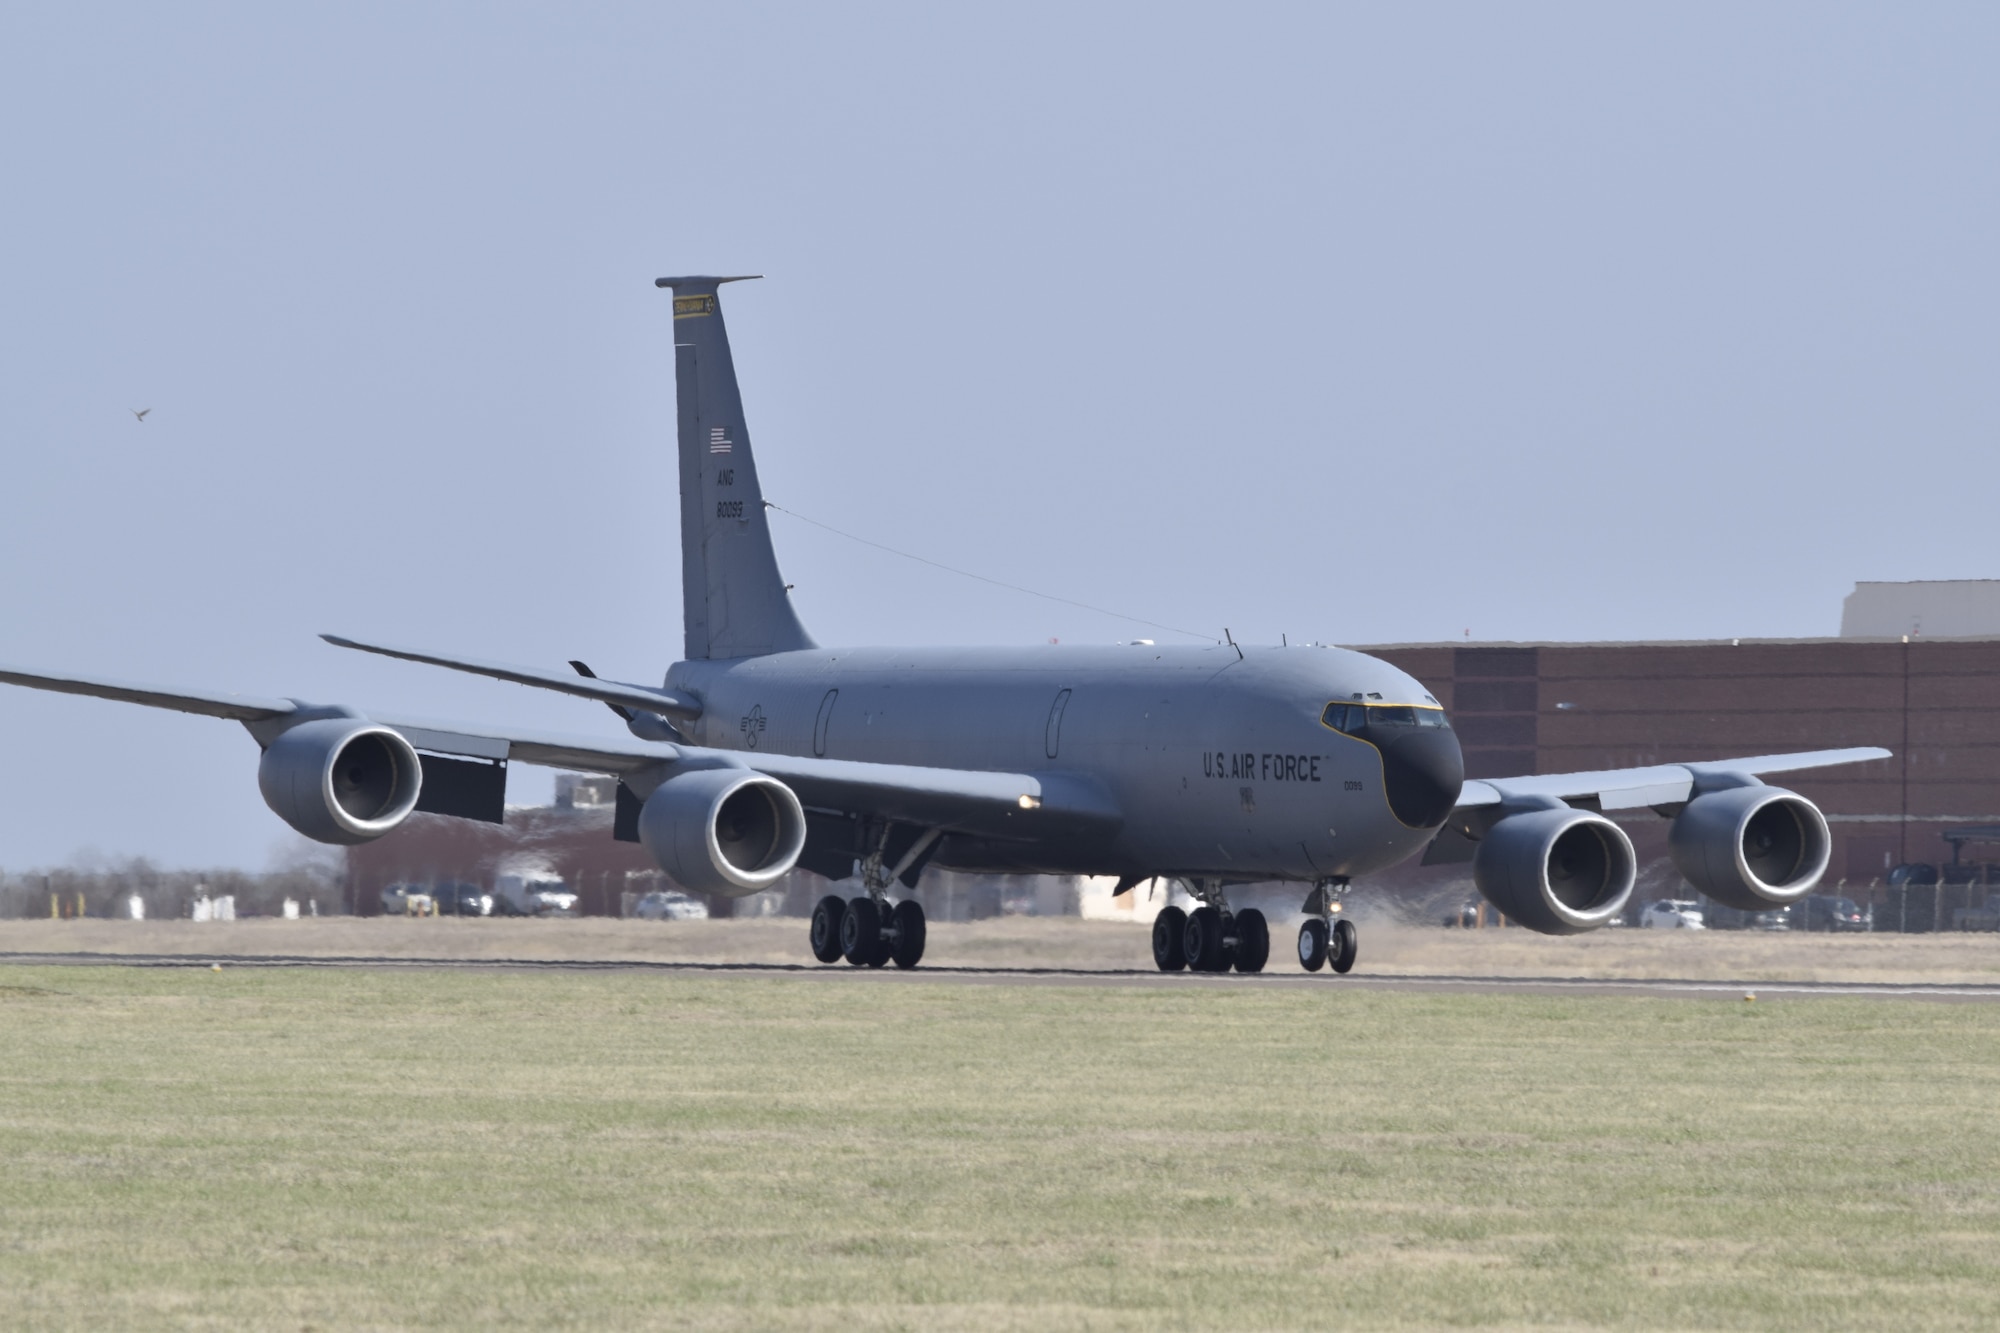 KC-135R Stratotanker, serial # 58-0099, lands at Tinker Air Force Base for induction into the periodic depot maintenance line with the Oklahoma City Air Logistics Complex March 9, 2017, Tinker Air Force Base, Oklahoma. The aircraft is assigned to the 171st Air Refueling Wing, Pennsylvania Air National Guard. (U.S. Air Force photo/Greg L. Davis)